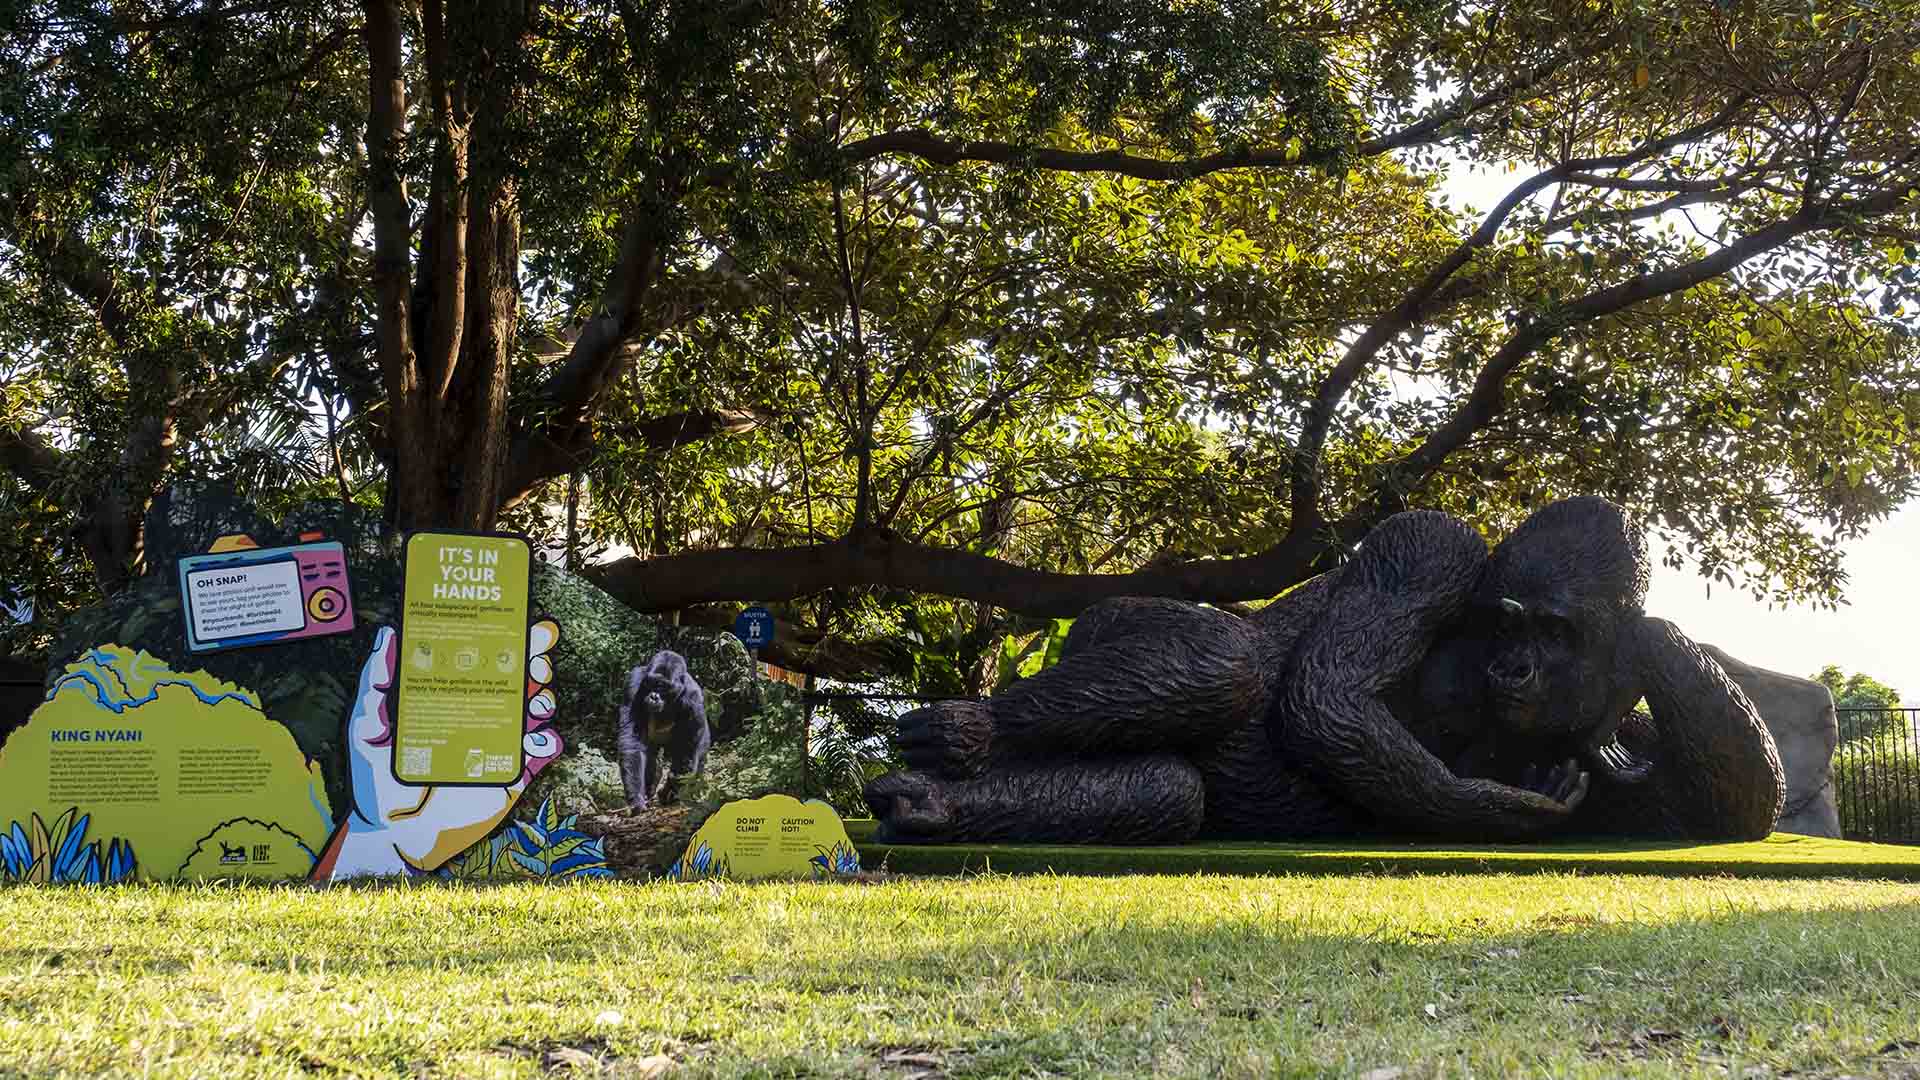 Taronga Zoo Is Now Home to the World's Largest Bronze Gorilla Statue